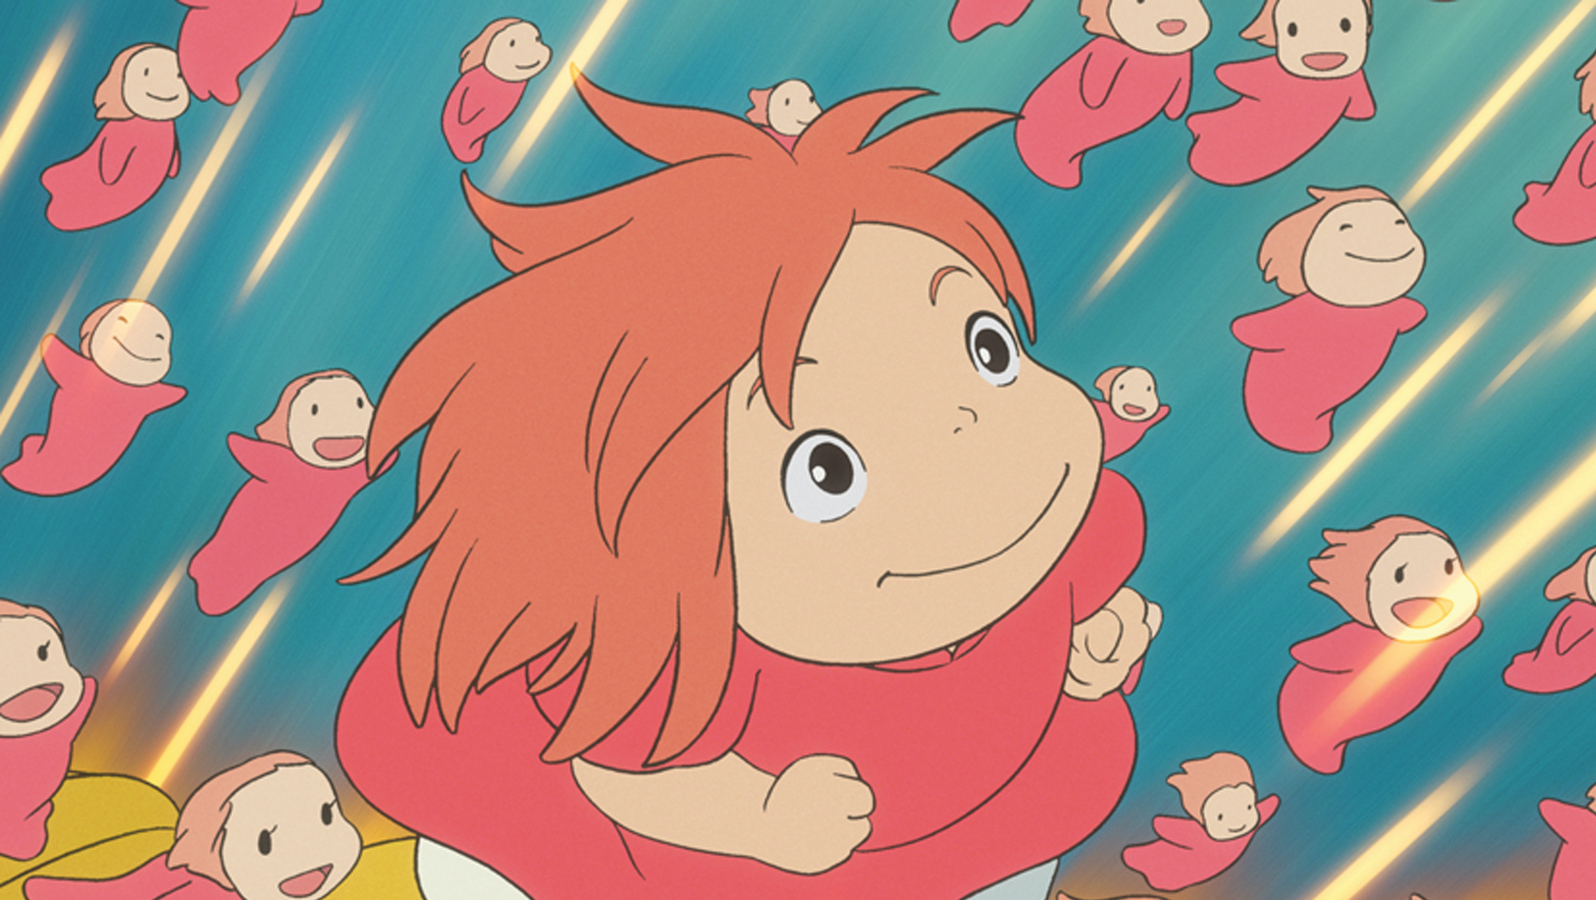 Ponyo – Museum of the Moving Image